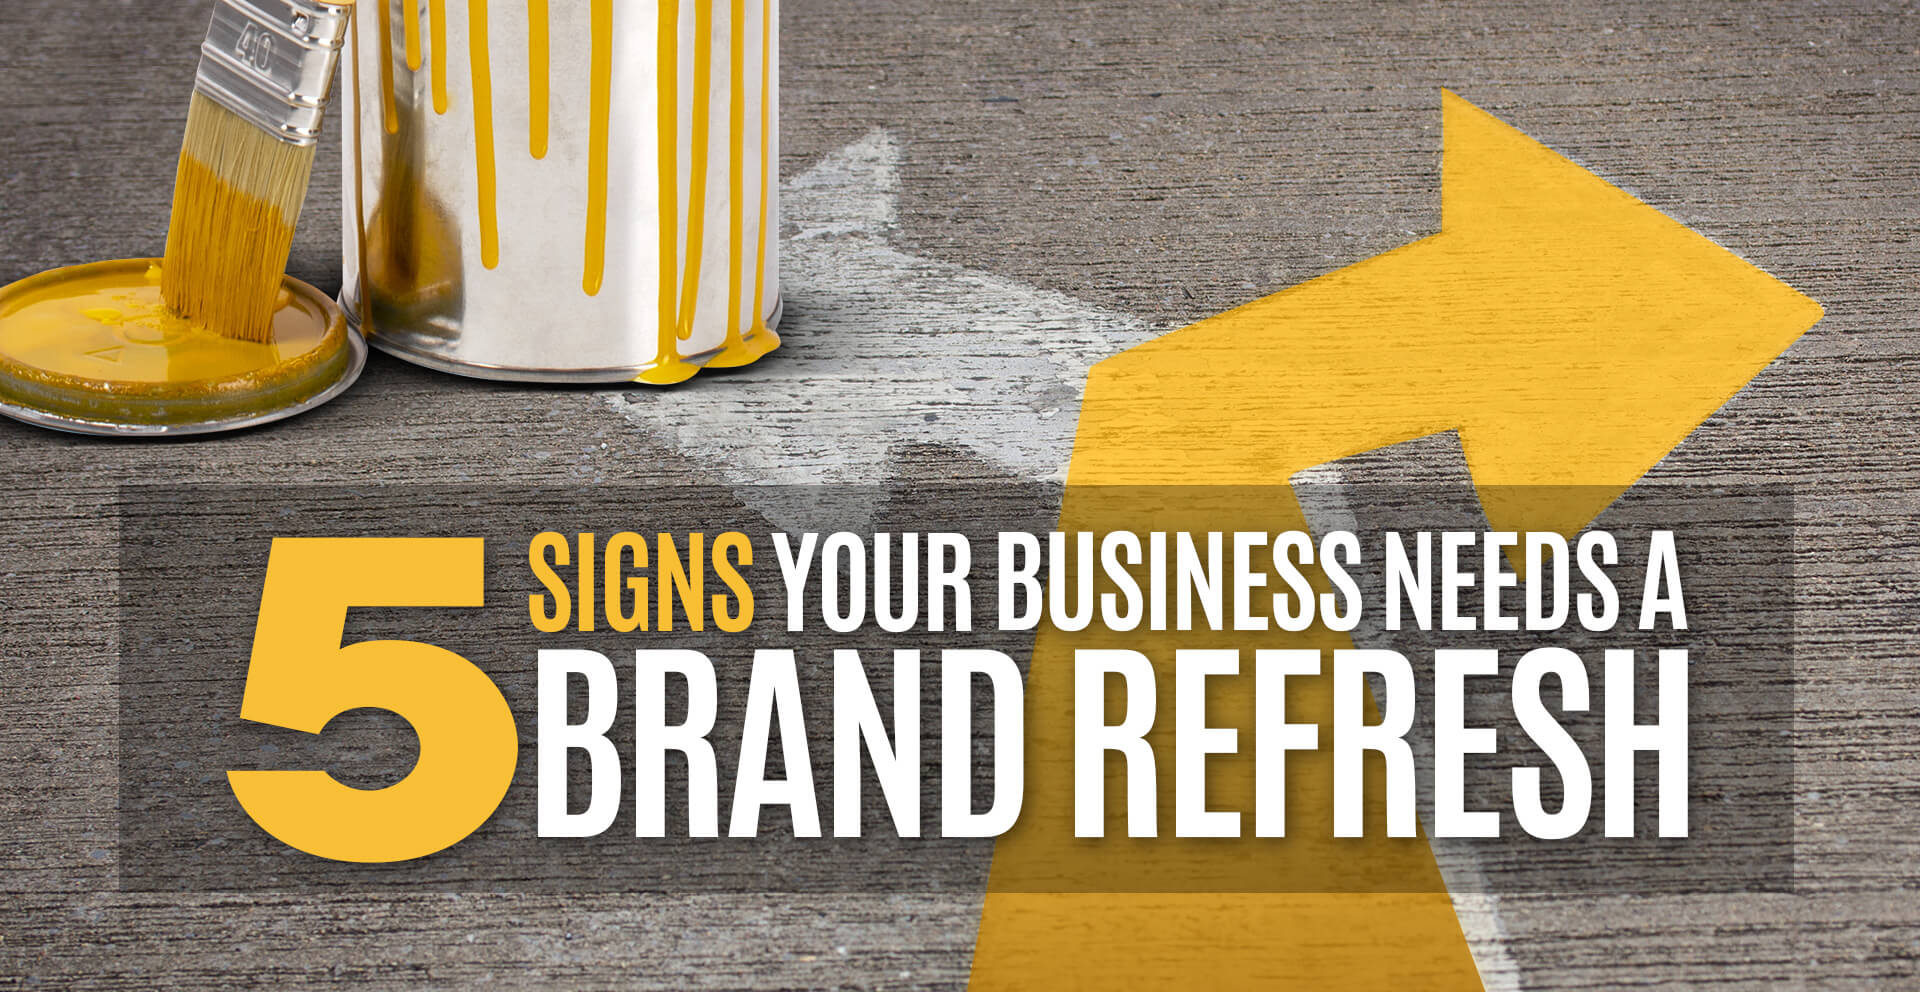 Title image of Paint Can & Brush Painting Road Sign in Different Direction - 5 Signs Your Business Needs A Brand Refresh